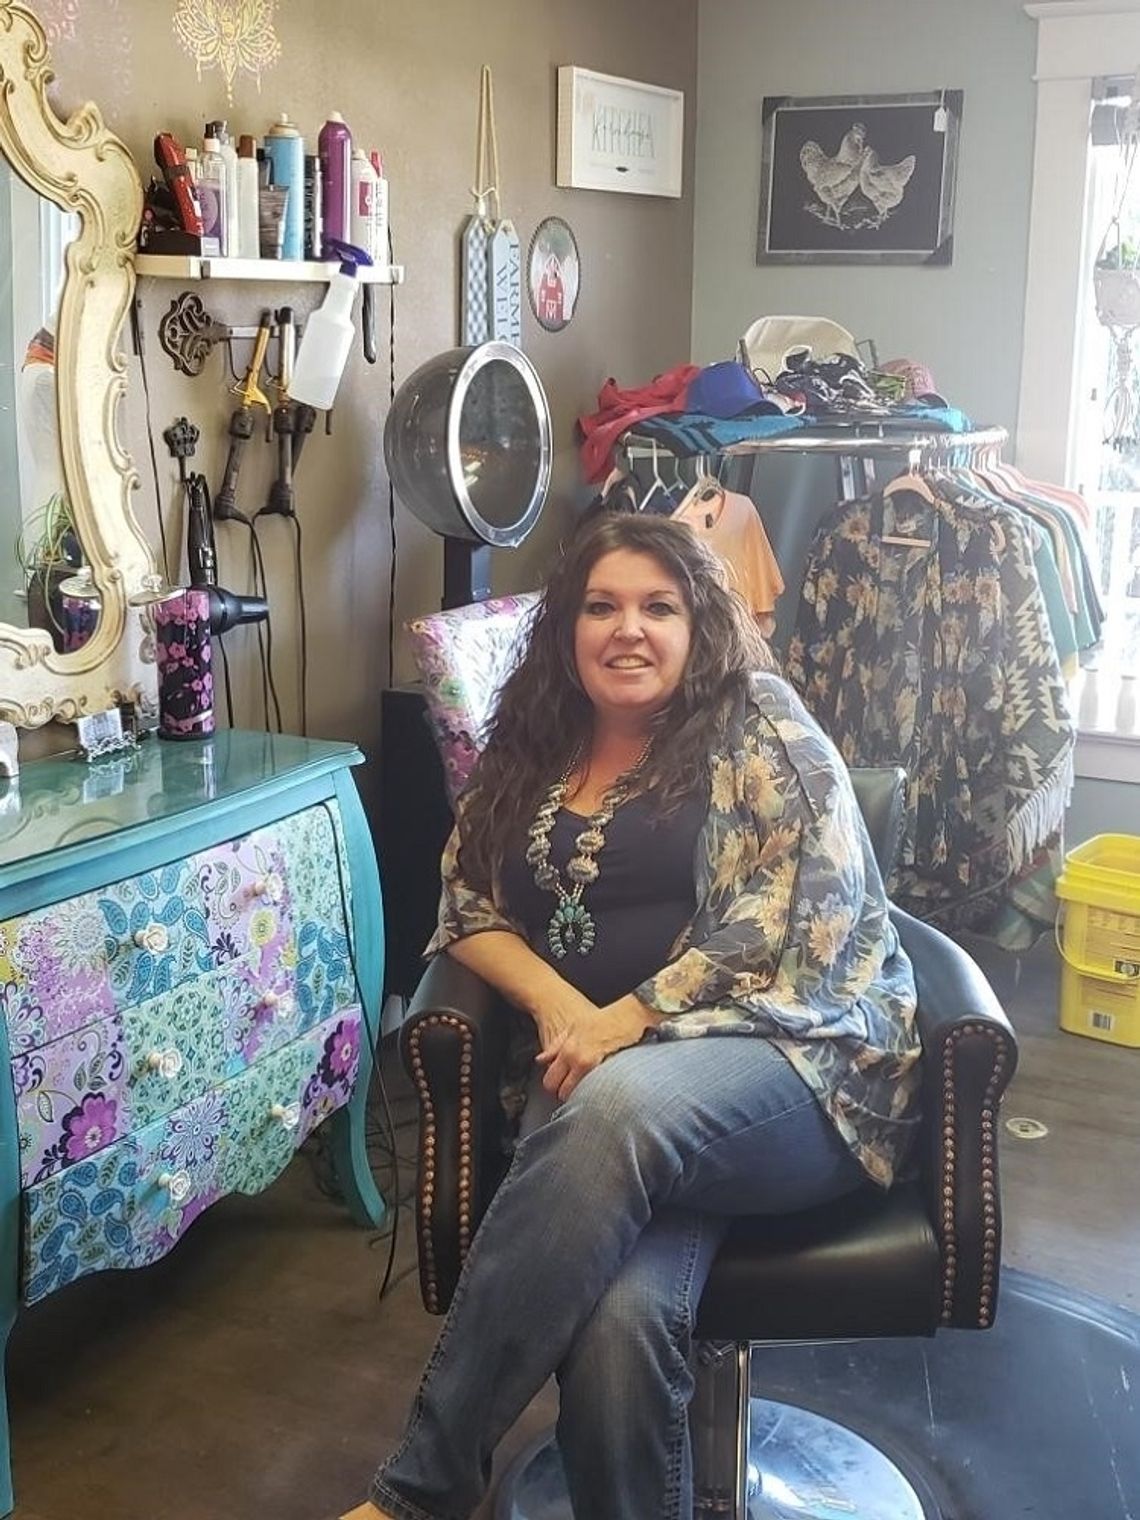 Return to Fallon and Open a Business -- My Gypsy Soul